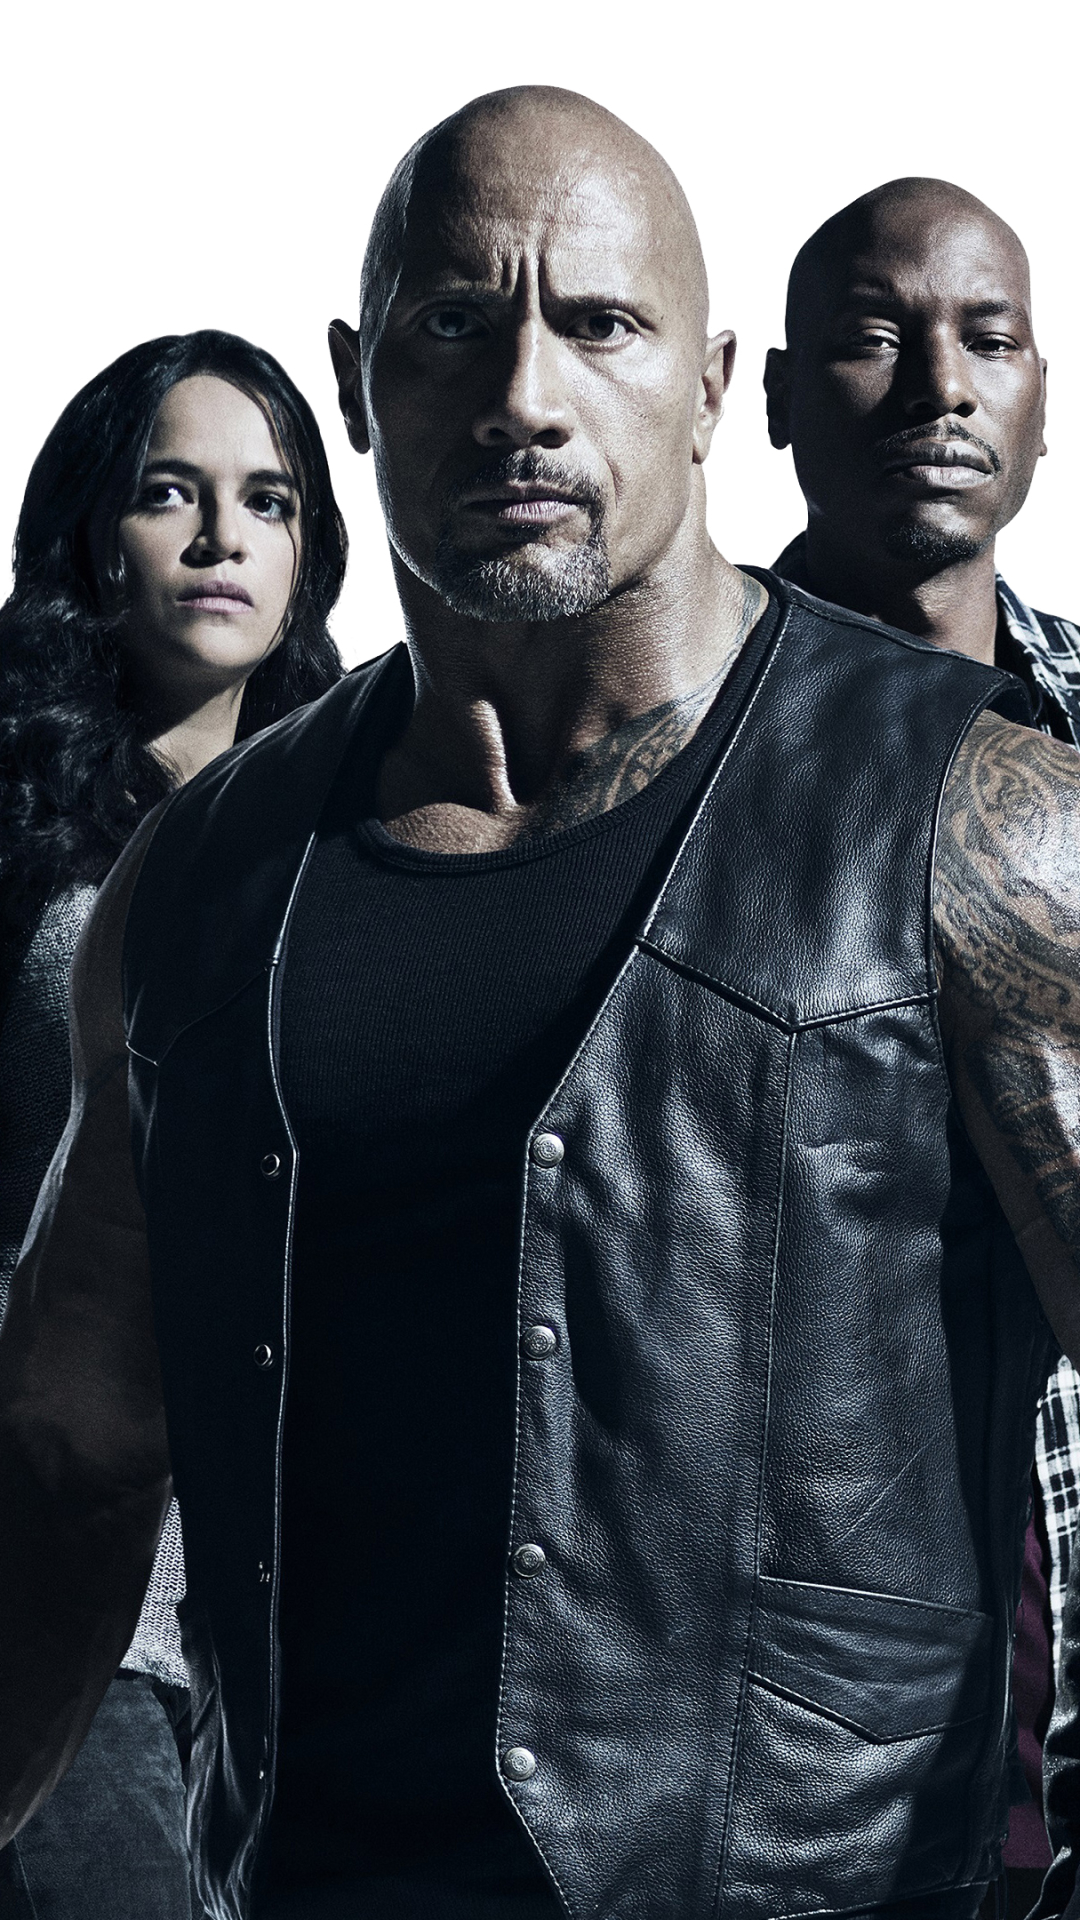 the fate of the furious, movie, dwayne johnson, jason statham, tyrese gibson, ludacris, vin diesel, charlize theron, michelle rodriguez, fast & furious